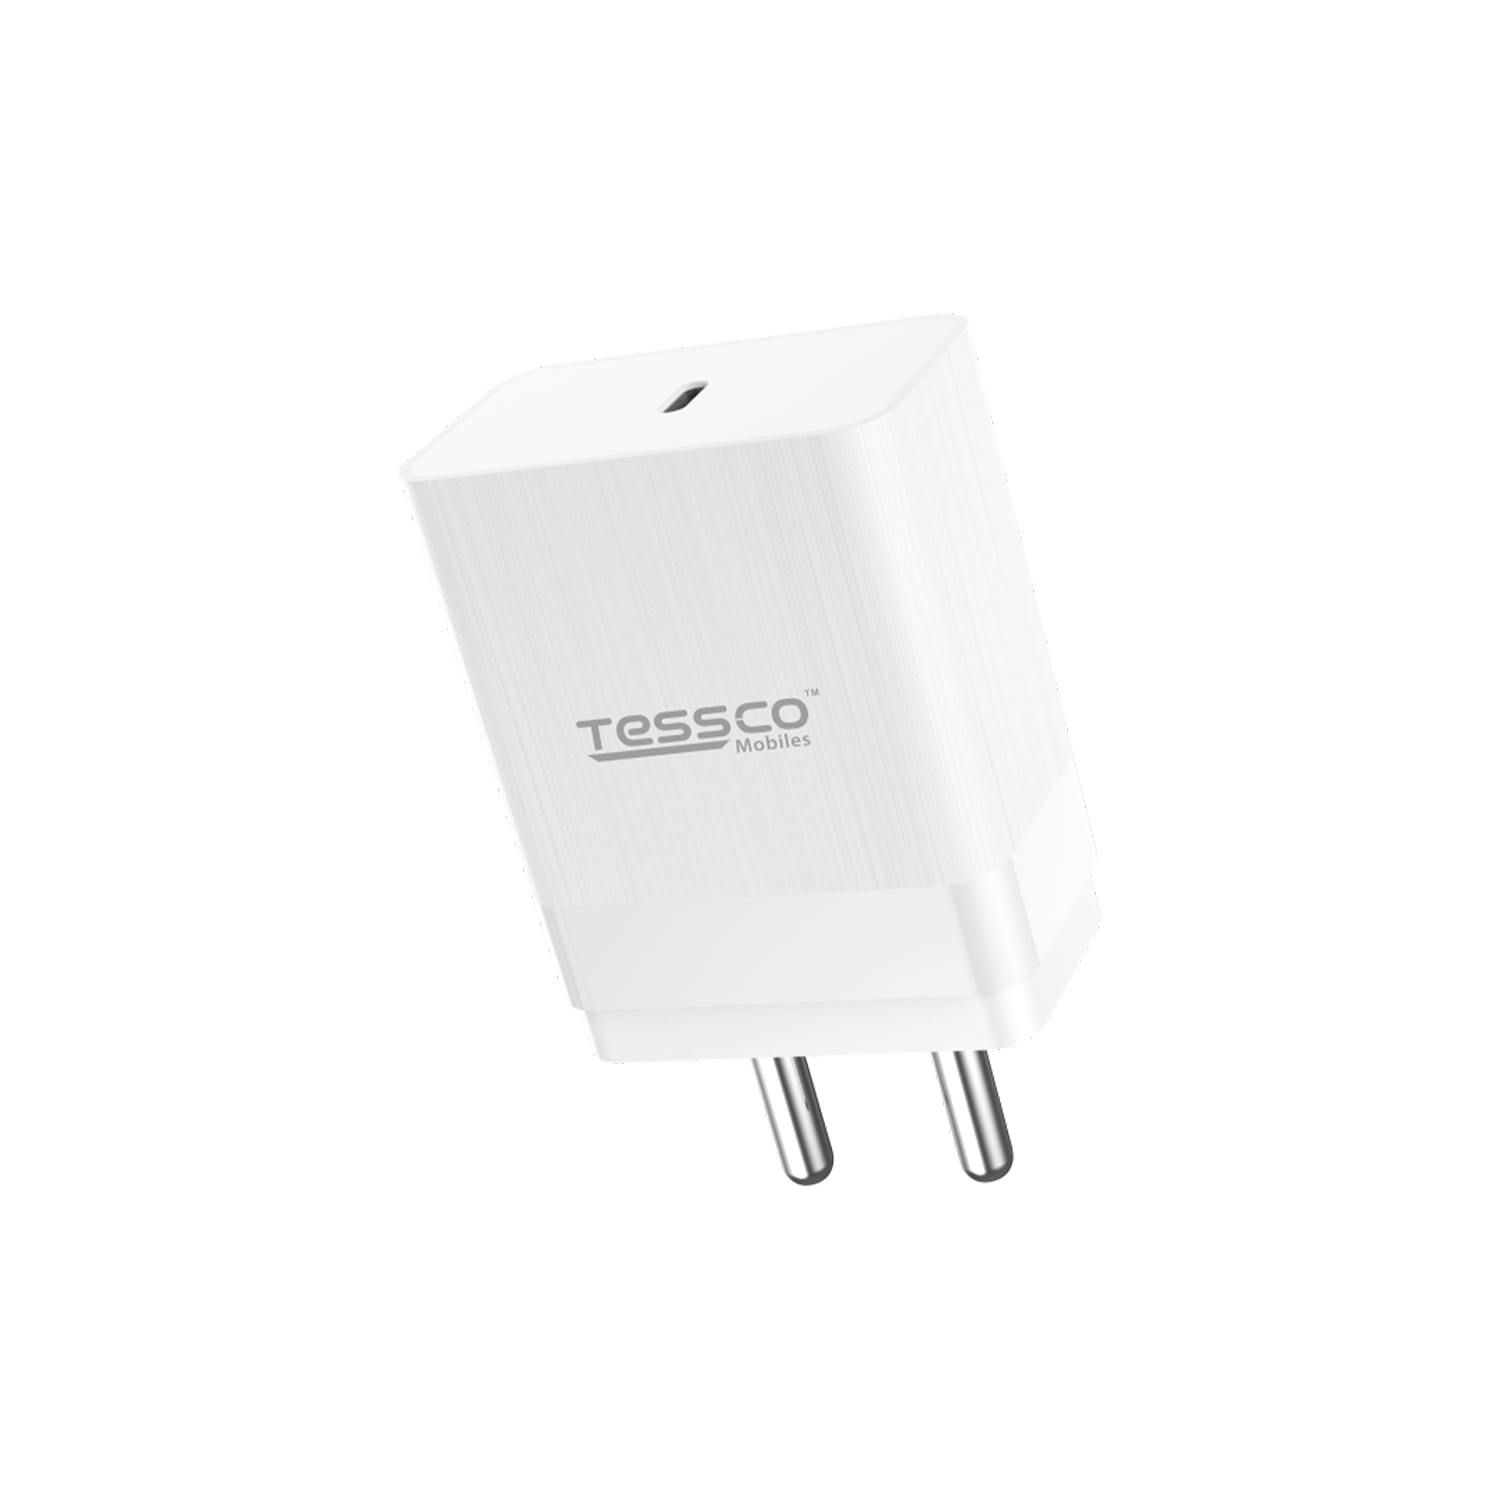 TESSCO Mobiles Speed Mobile Charger Adapter with Quick Charge 3.0